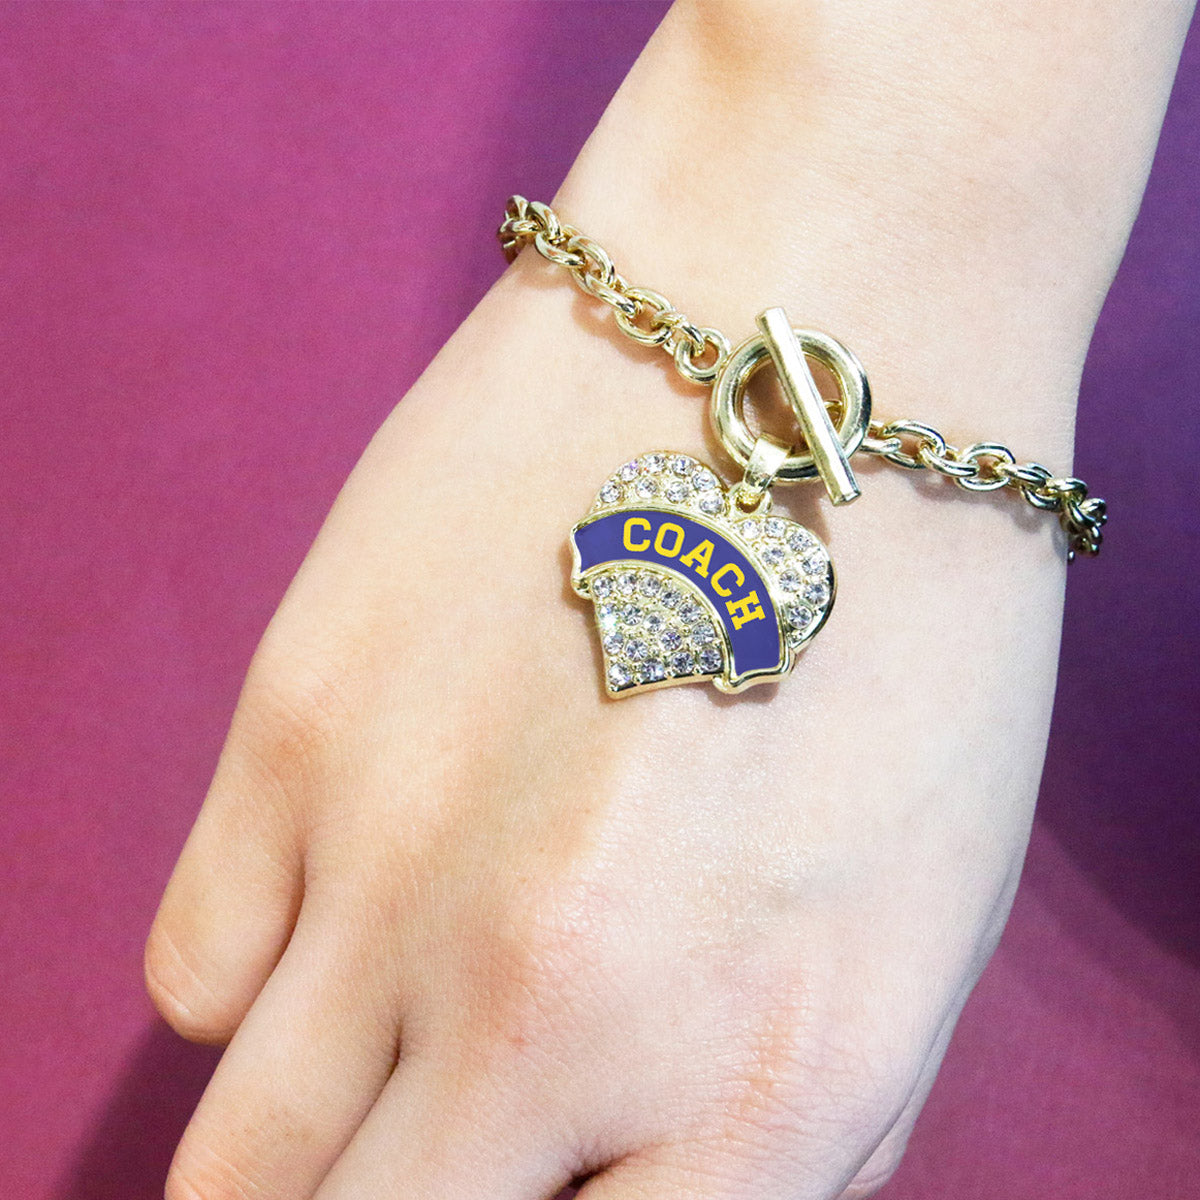 Gold Coach - Blue and Yellow Pave Heart Charm Toggle Bracelet